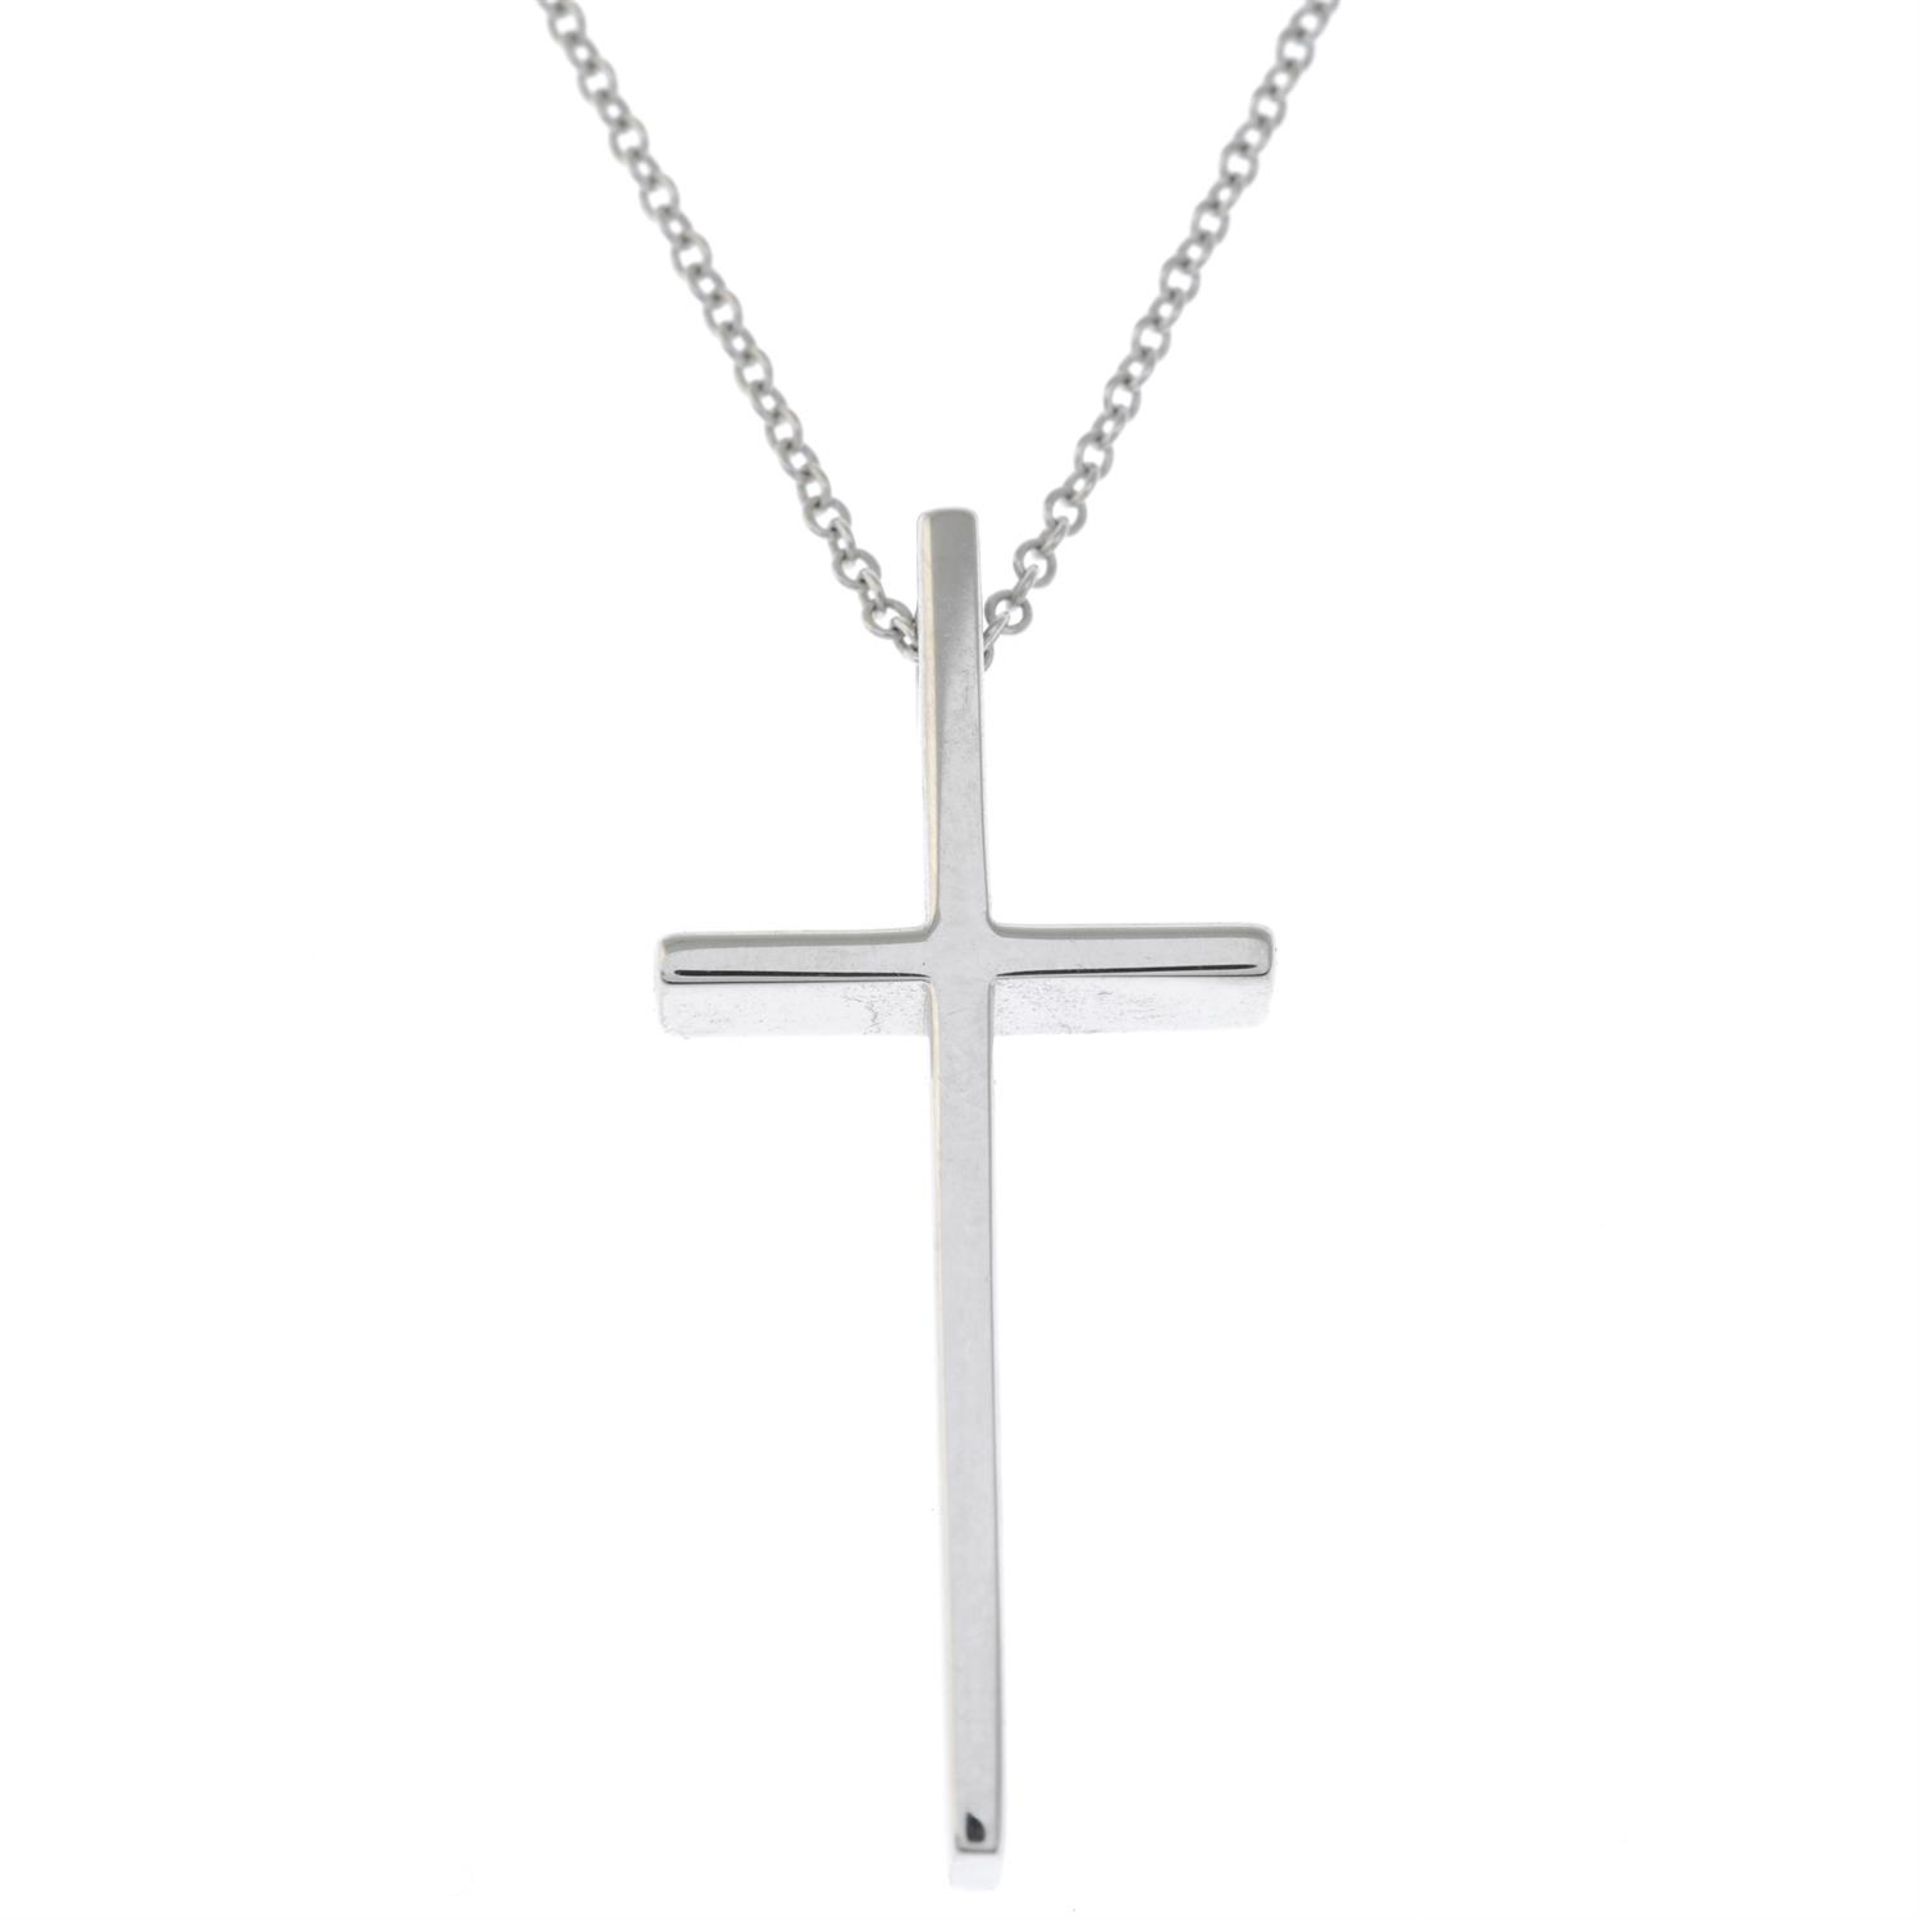 A cross pendant, with chain, by Tiffany & Co.